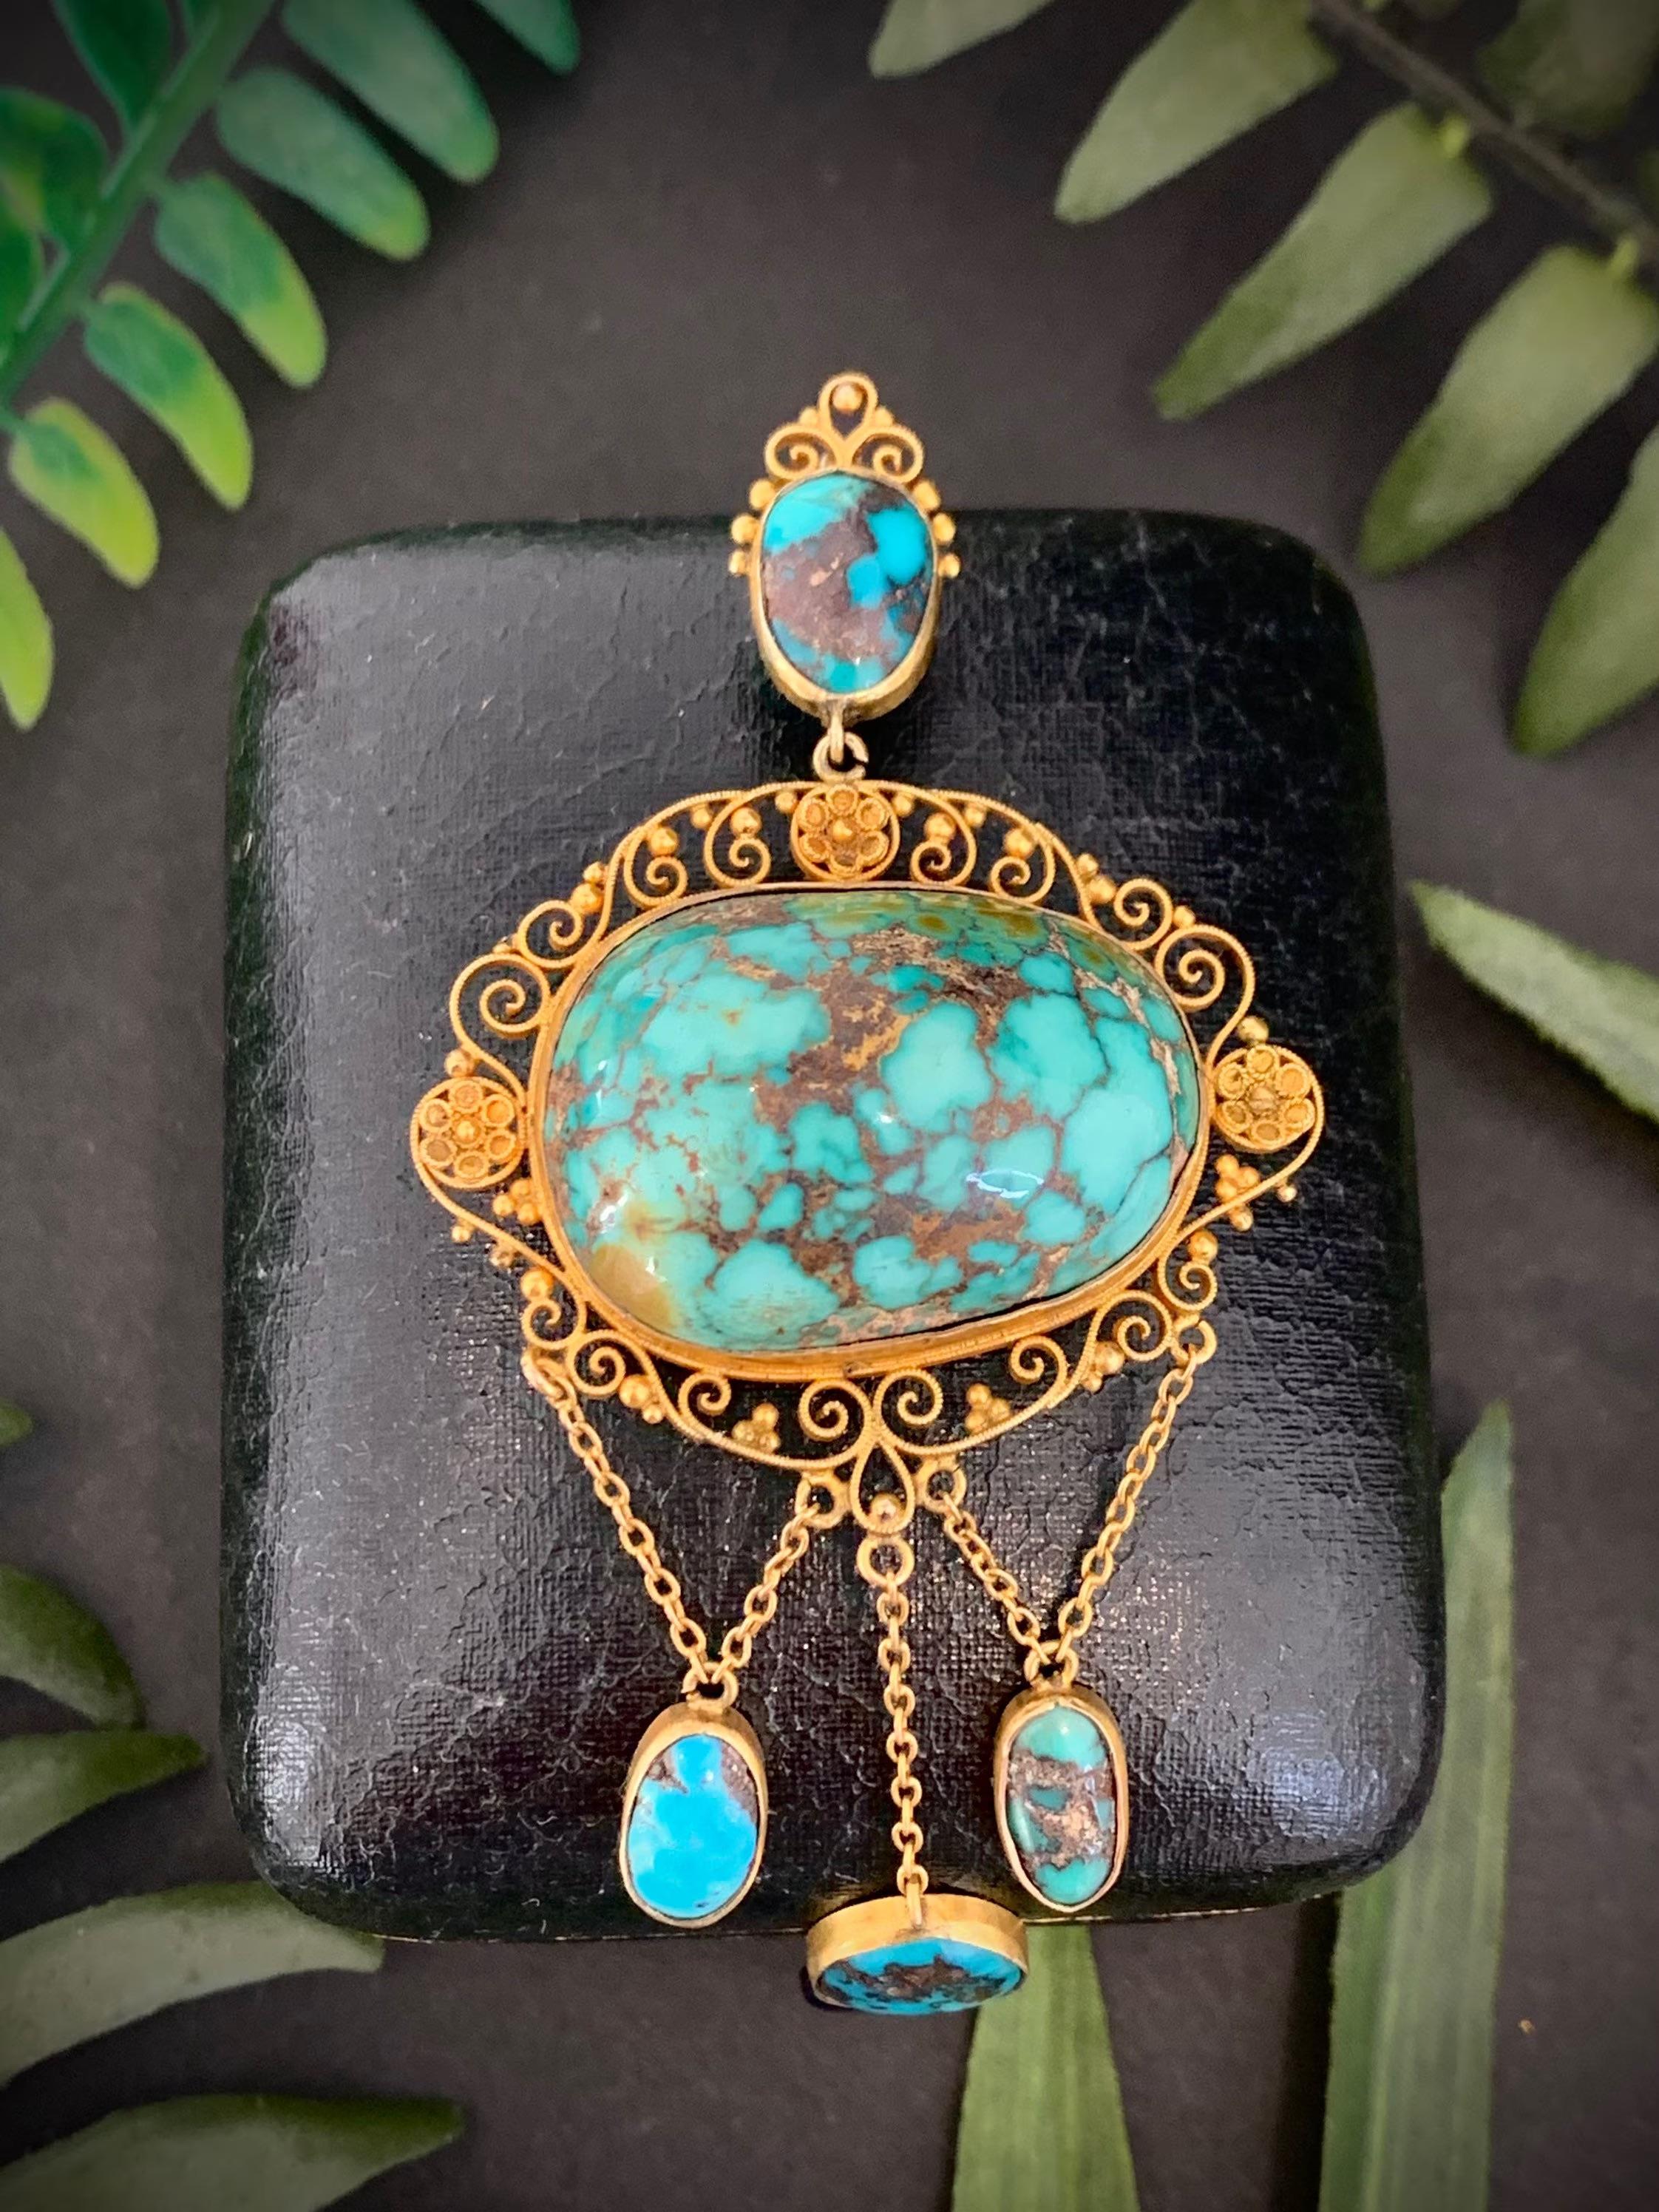 Antique Turquoise Matrix Pendant 

Victorian Circa 1890

15ct Gold

From the Victorian Arts & Crafts Period, Set with The Most Fabulous Natural Turquoise Matrix. Framed Perfectly with the Most Intricate Wire Work- all Crafted by Hand to Fit the